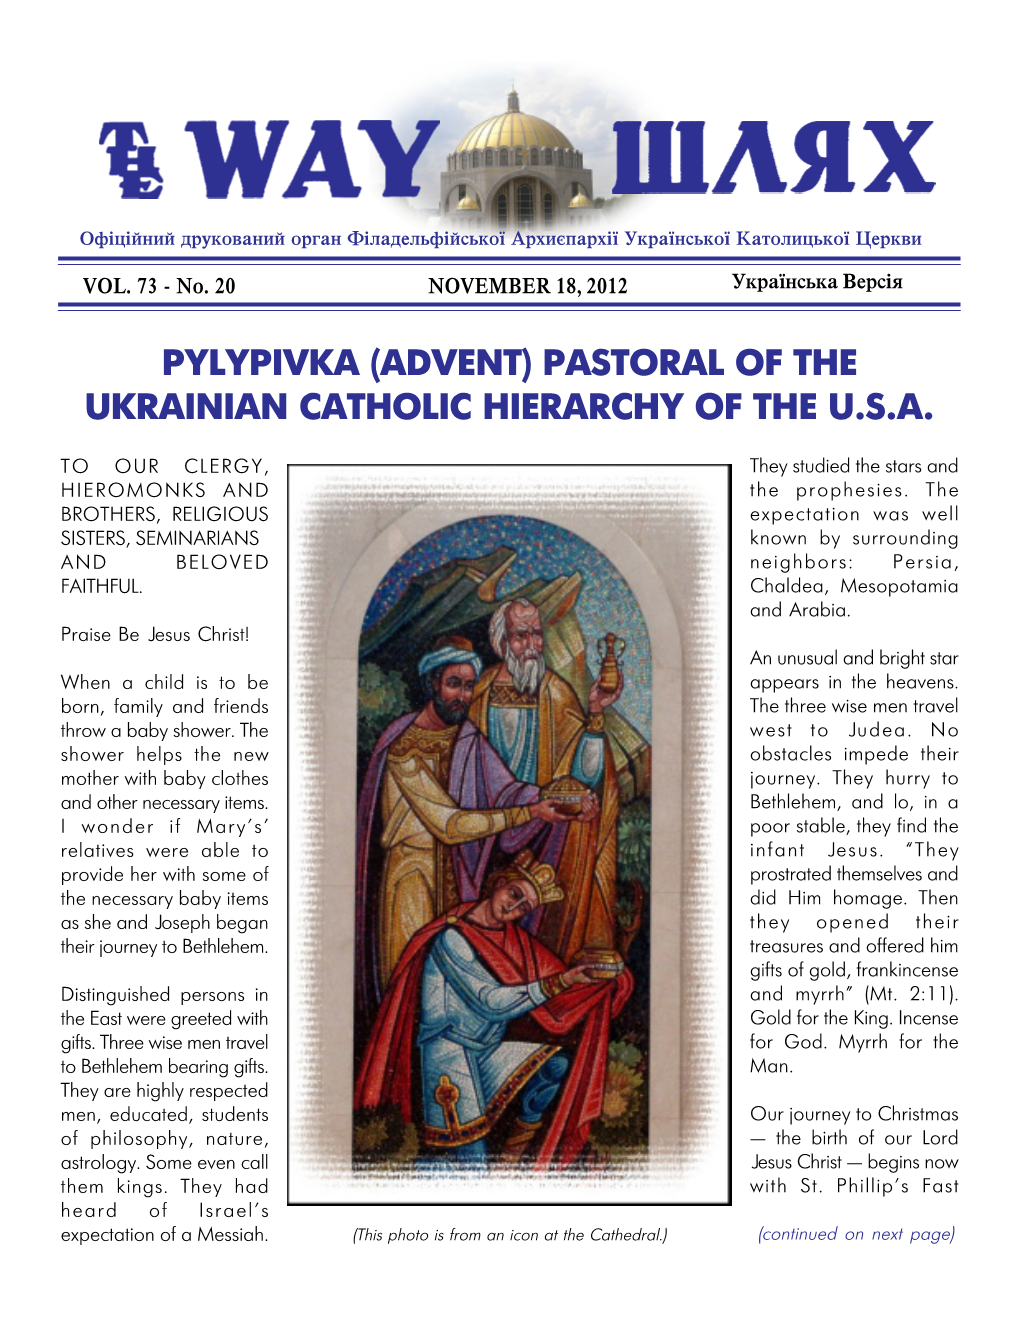 Pastoral of the Ukrainian Catholic Hierarchy of the U.S.A